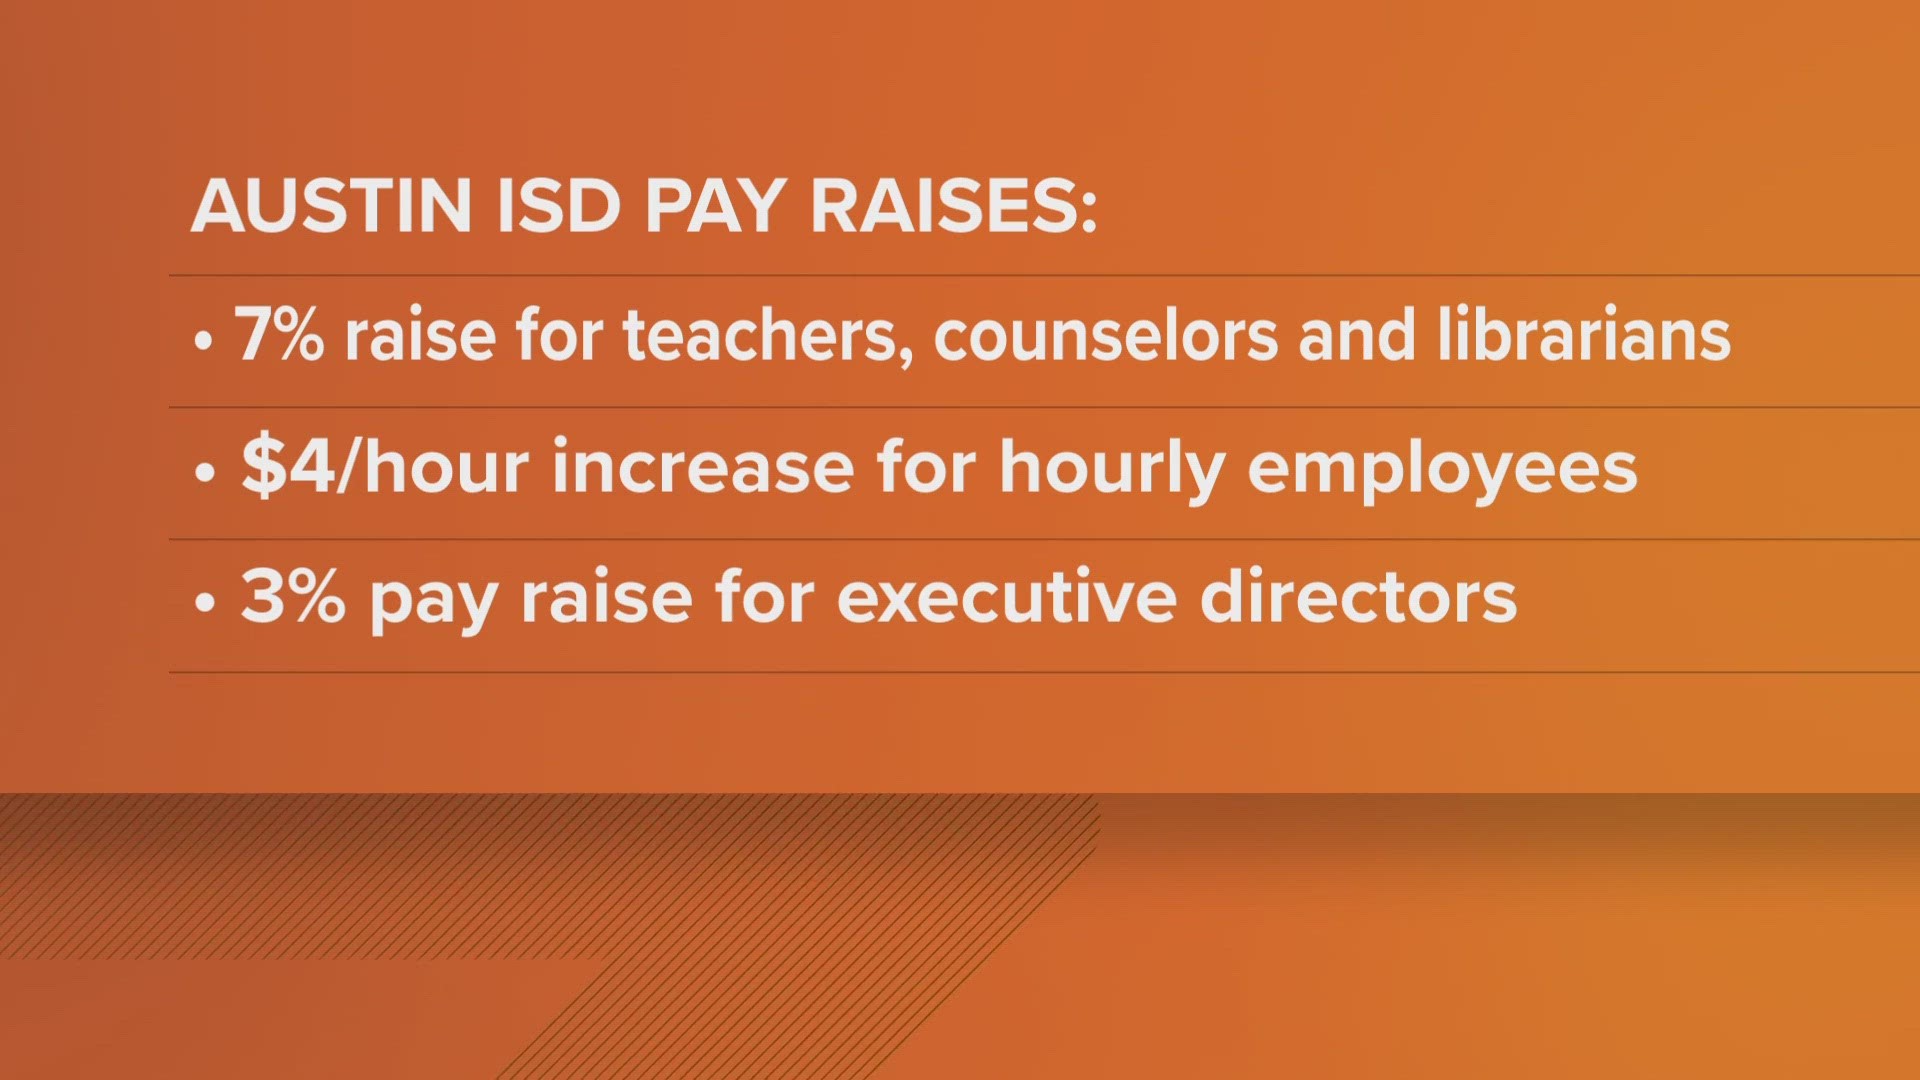 The Austin ISD Board of Trustees approved the district's budget early Friday morning.